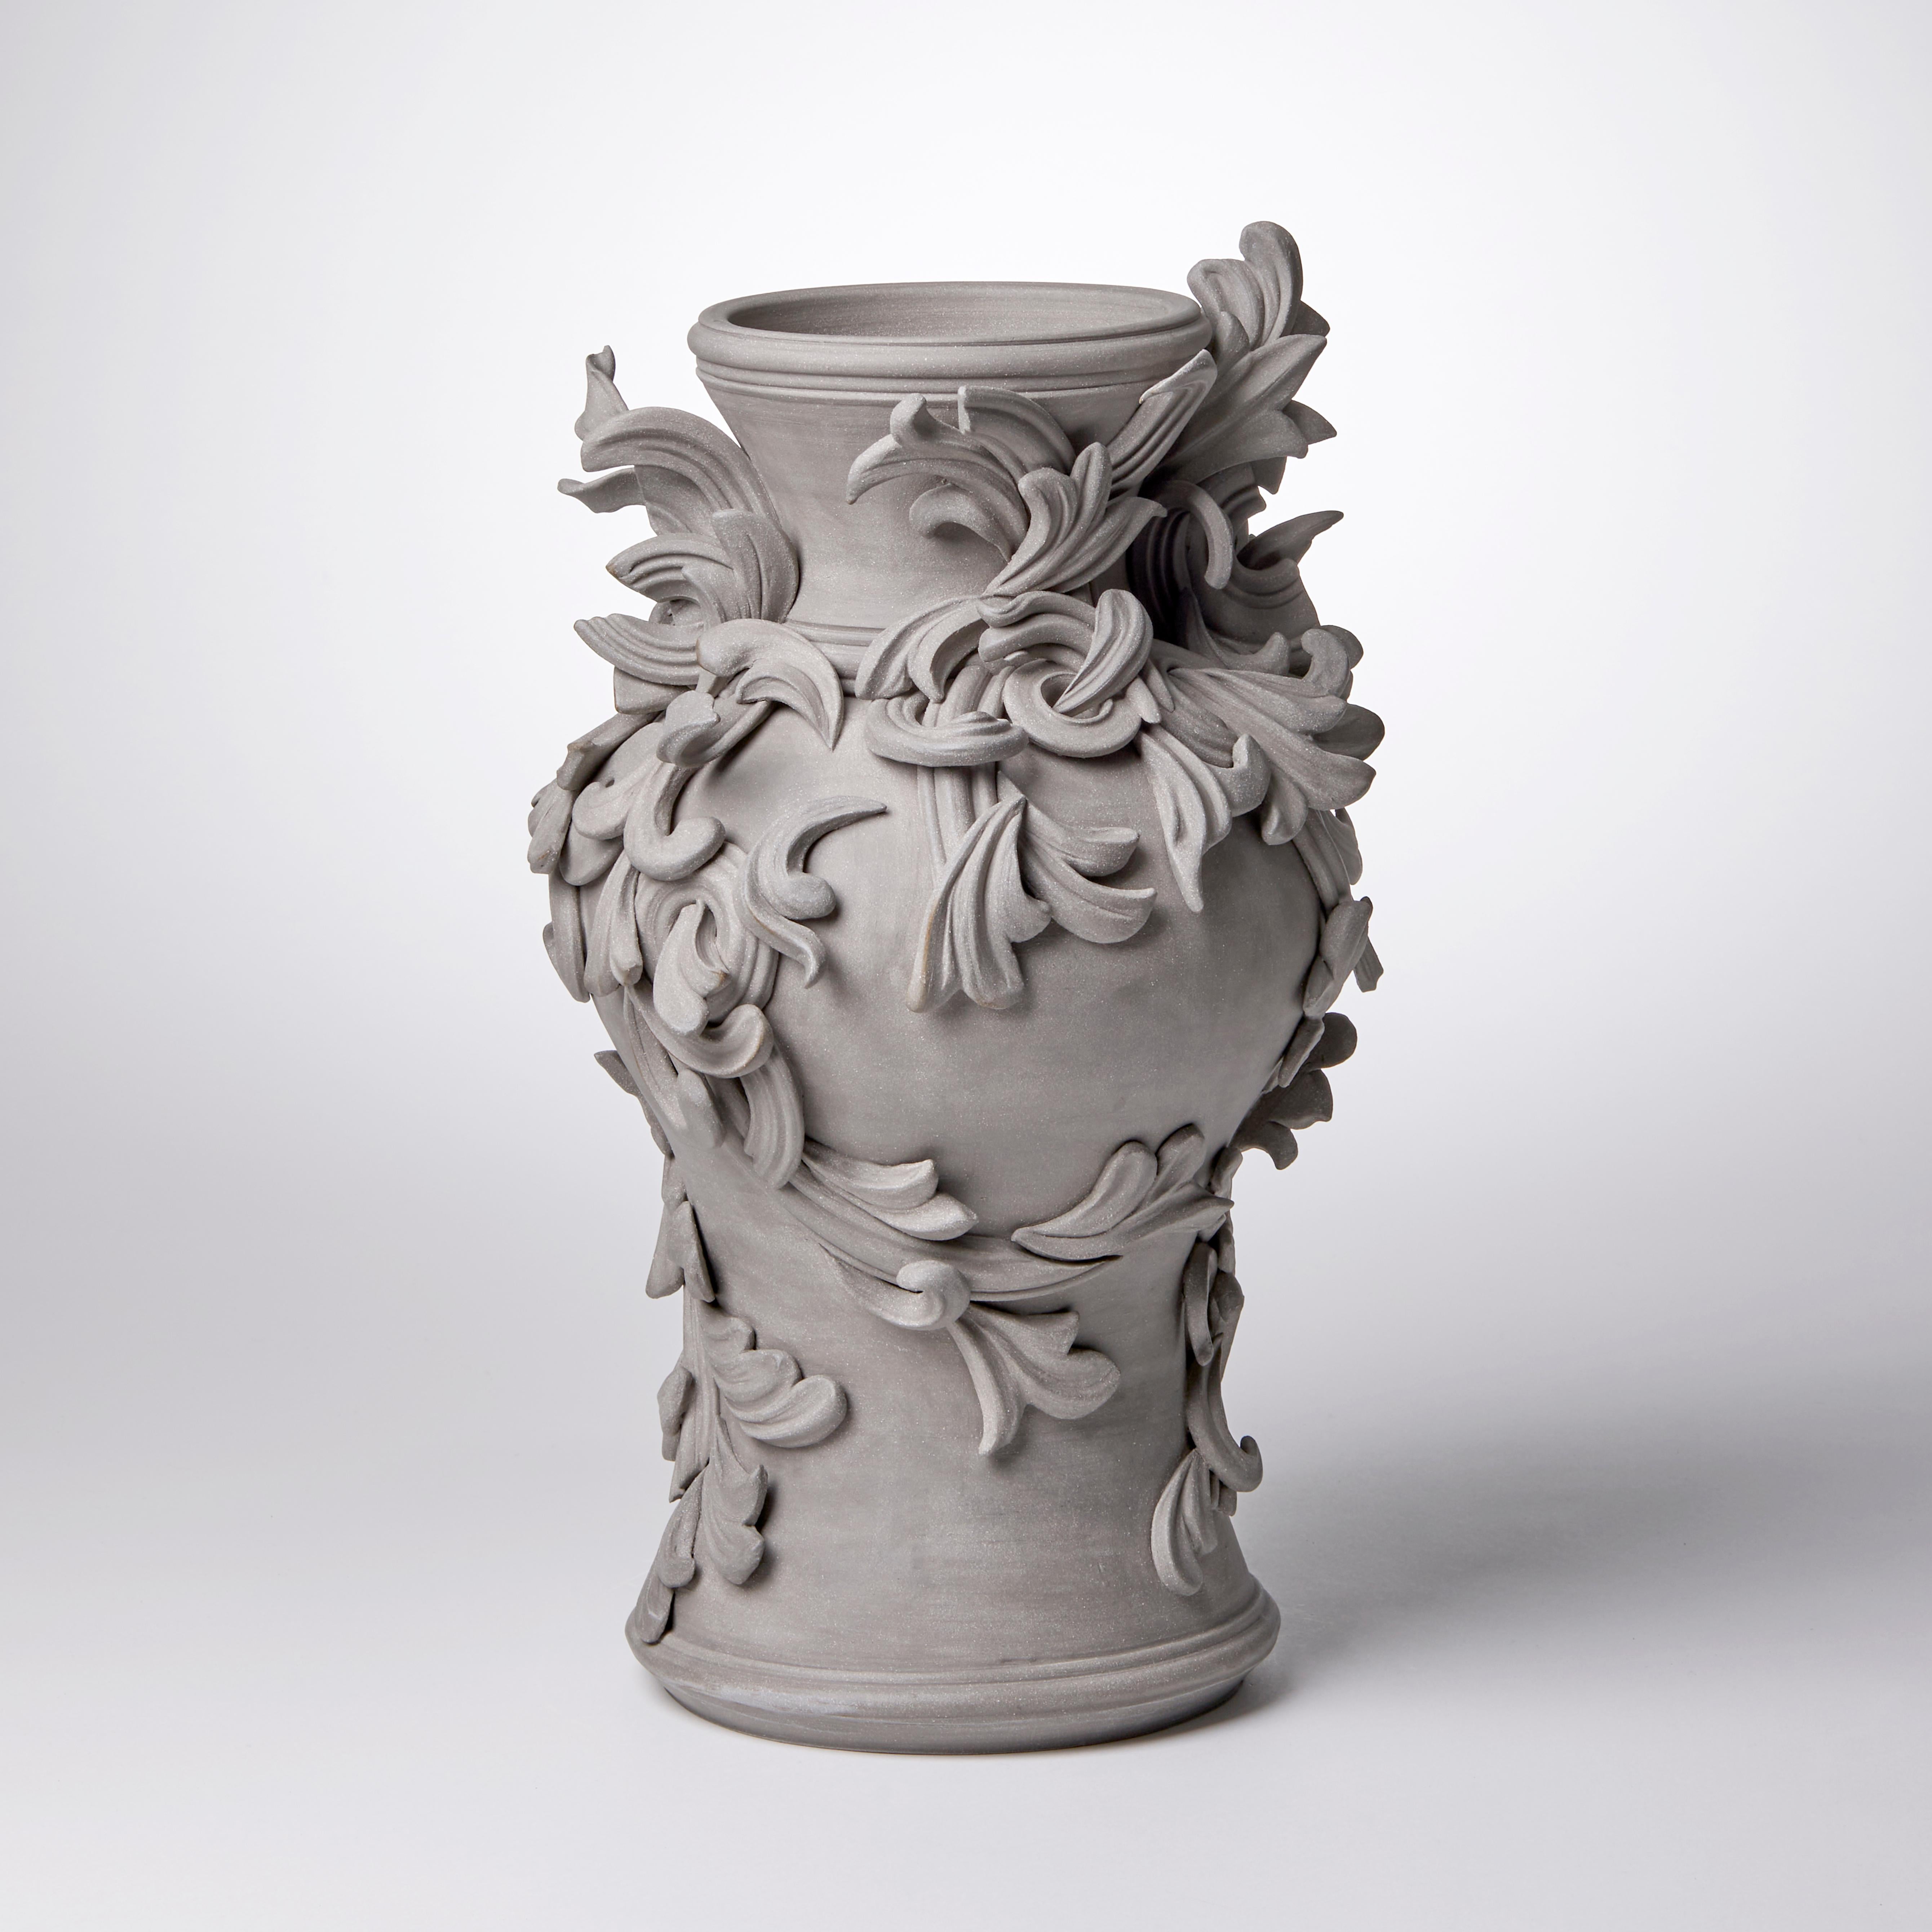 Vari Capitelli X is a unique handmade colored stoneware ceramic sculptural vase in warm grey by the British artist Jo Taylor. The central form has been thrown on the potter's wheel and also hand-built, then adorned with architectural inspired